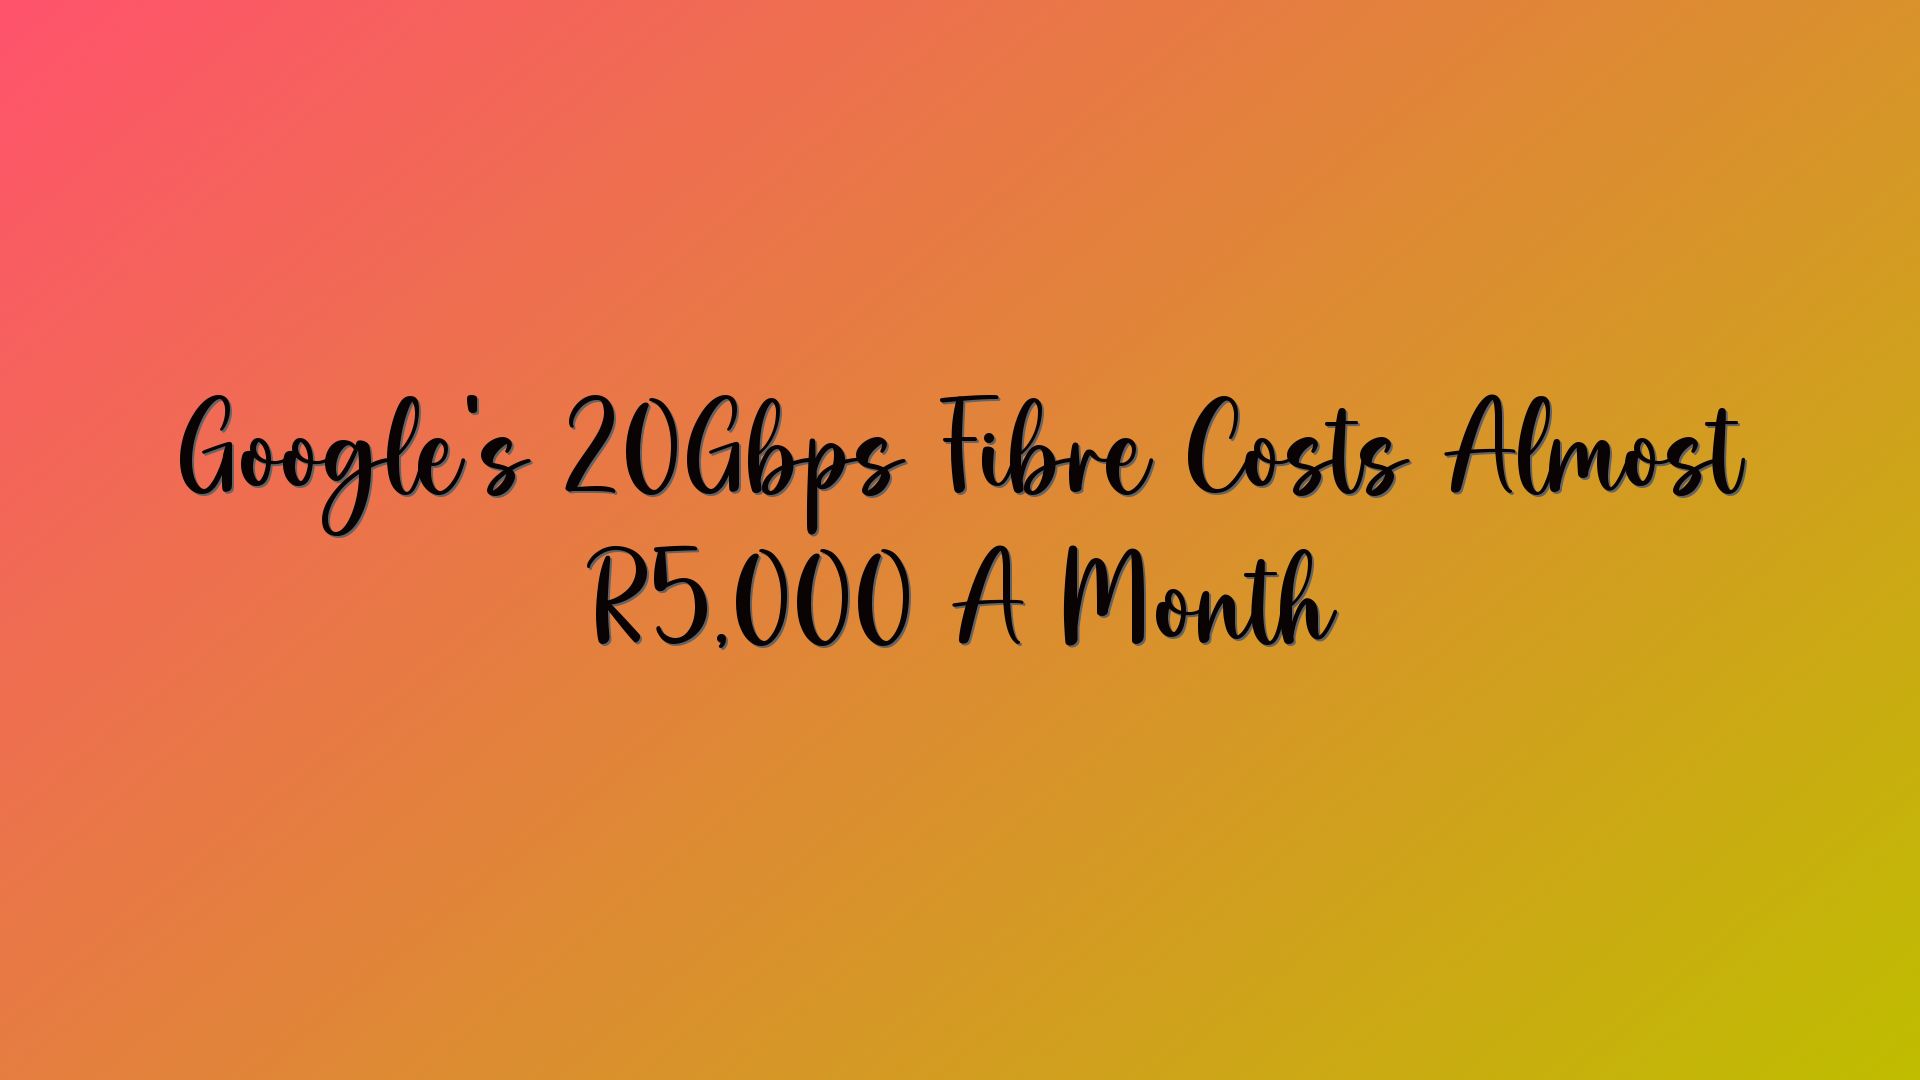 Google’s 20Gbps Fibre Costs Almost R5,000 A Month